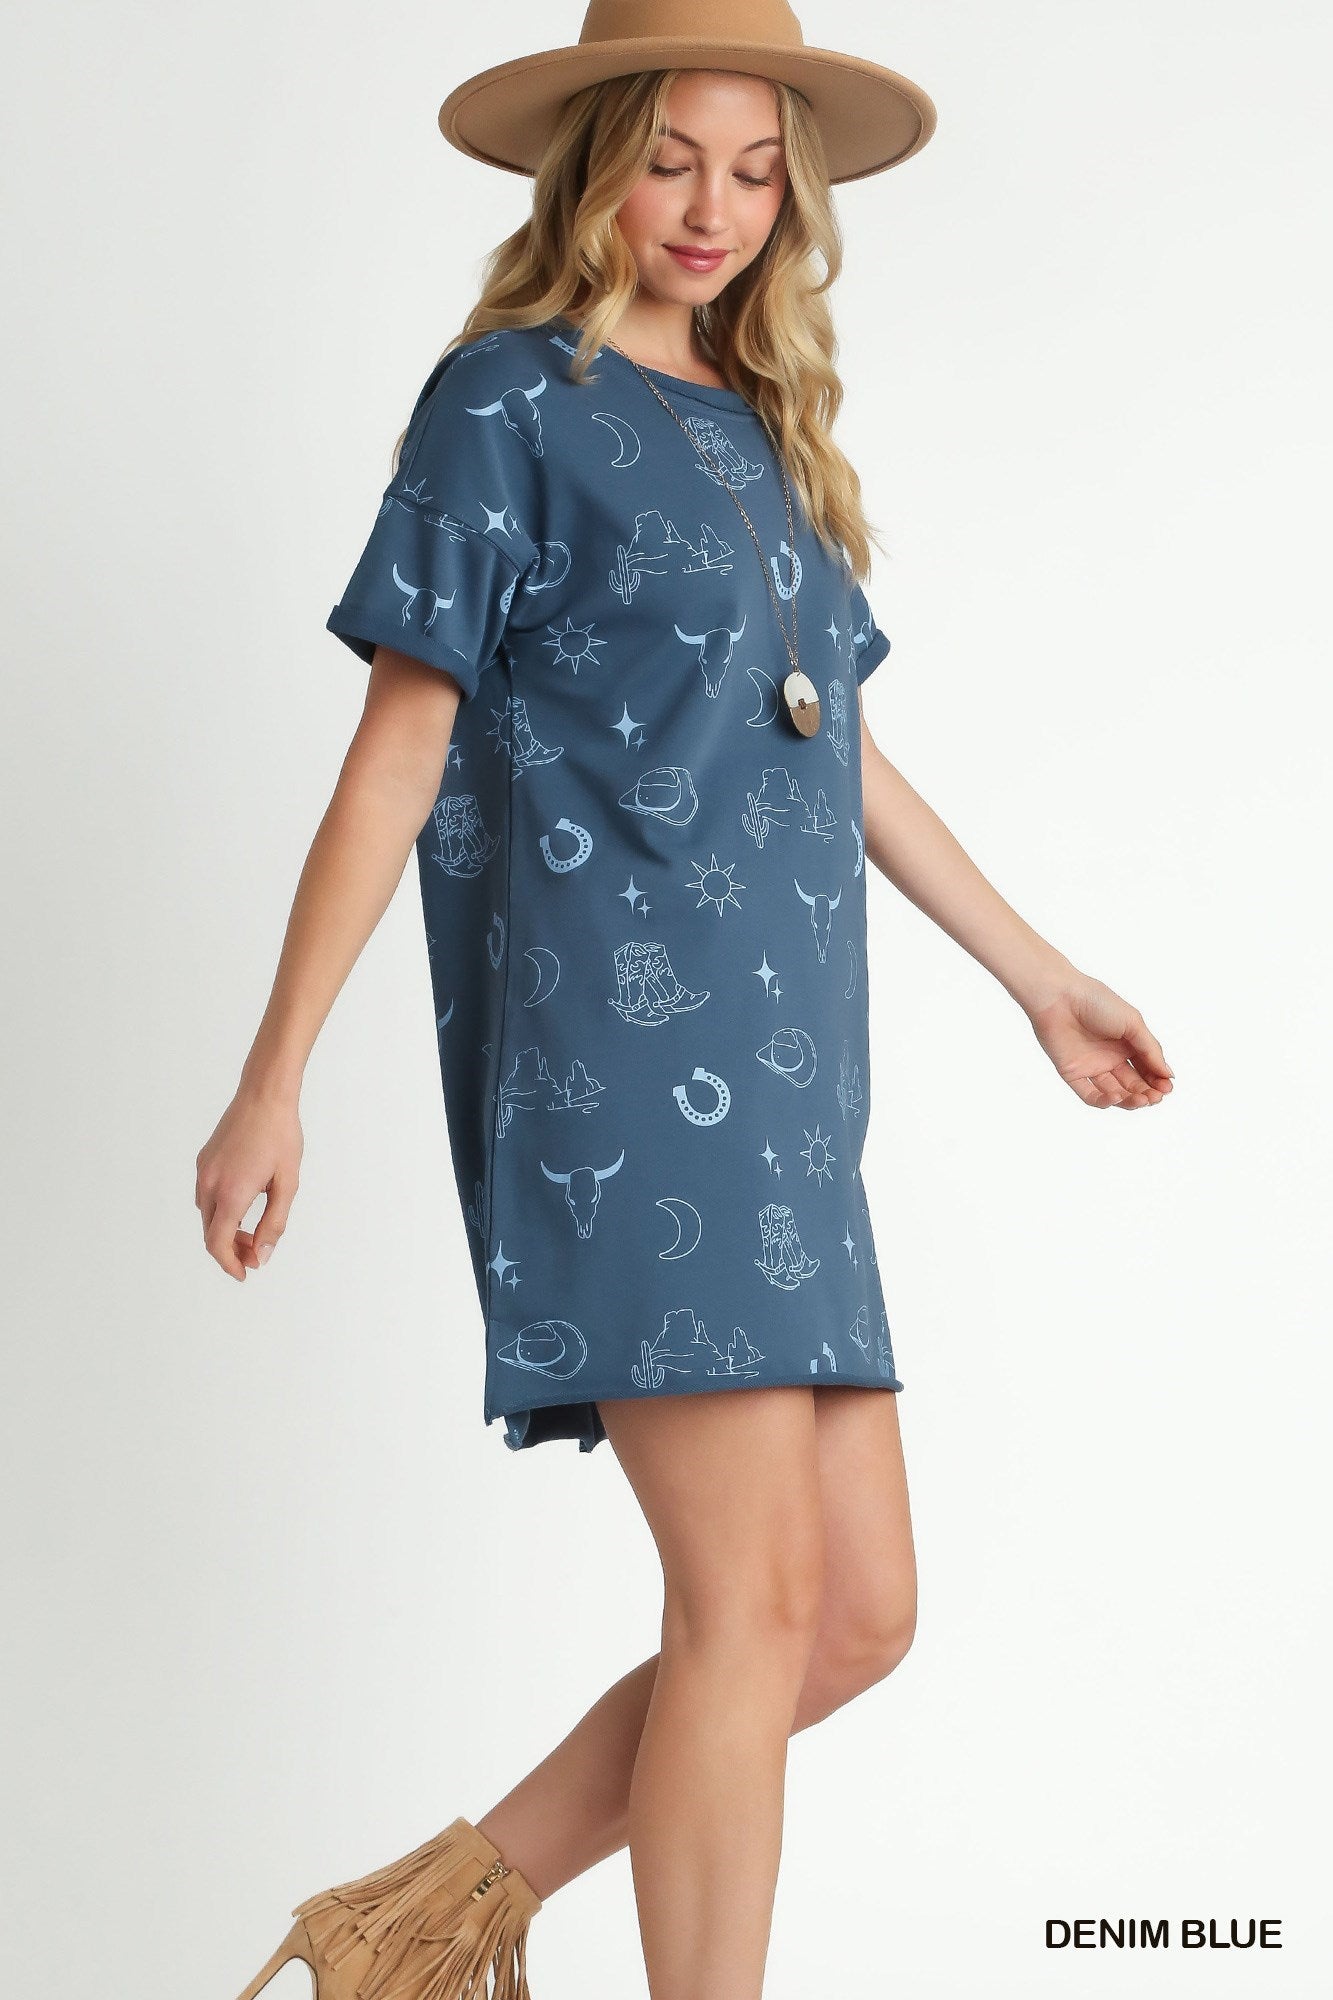 Perfect for the Rodeo Denim Blue Dress